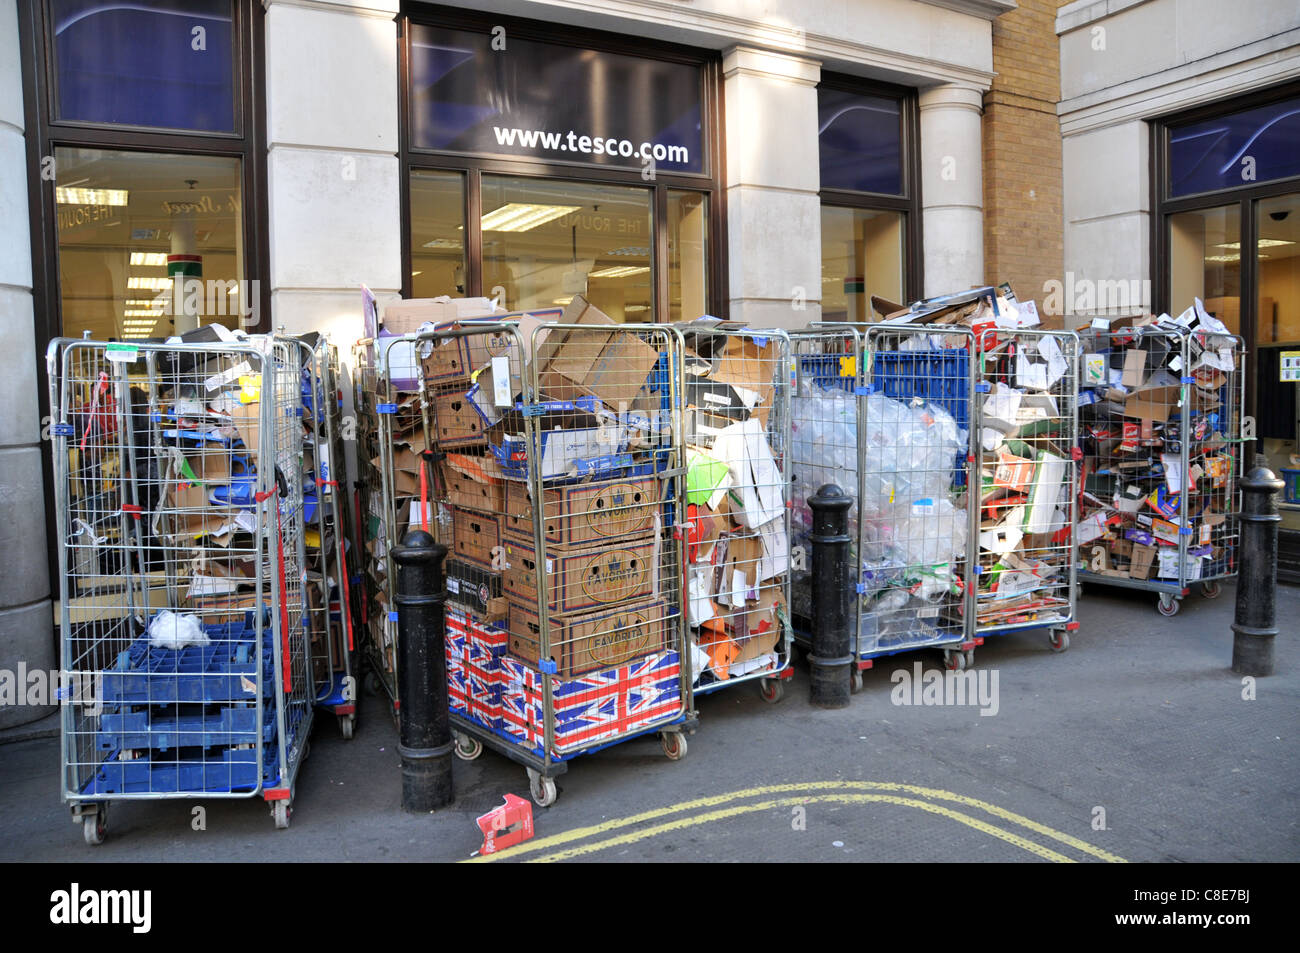 Tesco Metro Store Covent Garden London waste recycling packaging cardboard boxes food packaging retail Stock Photo